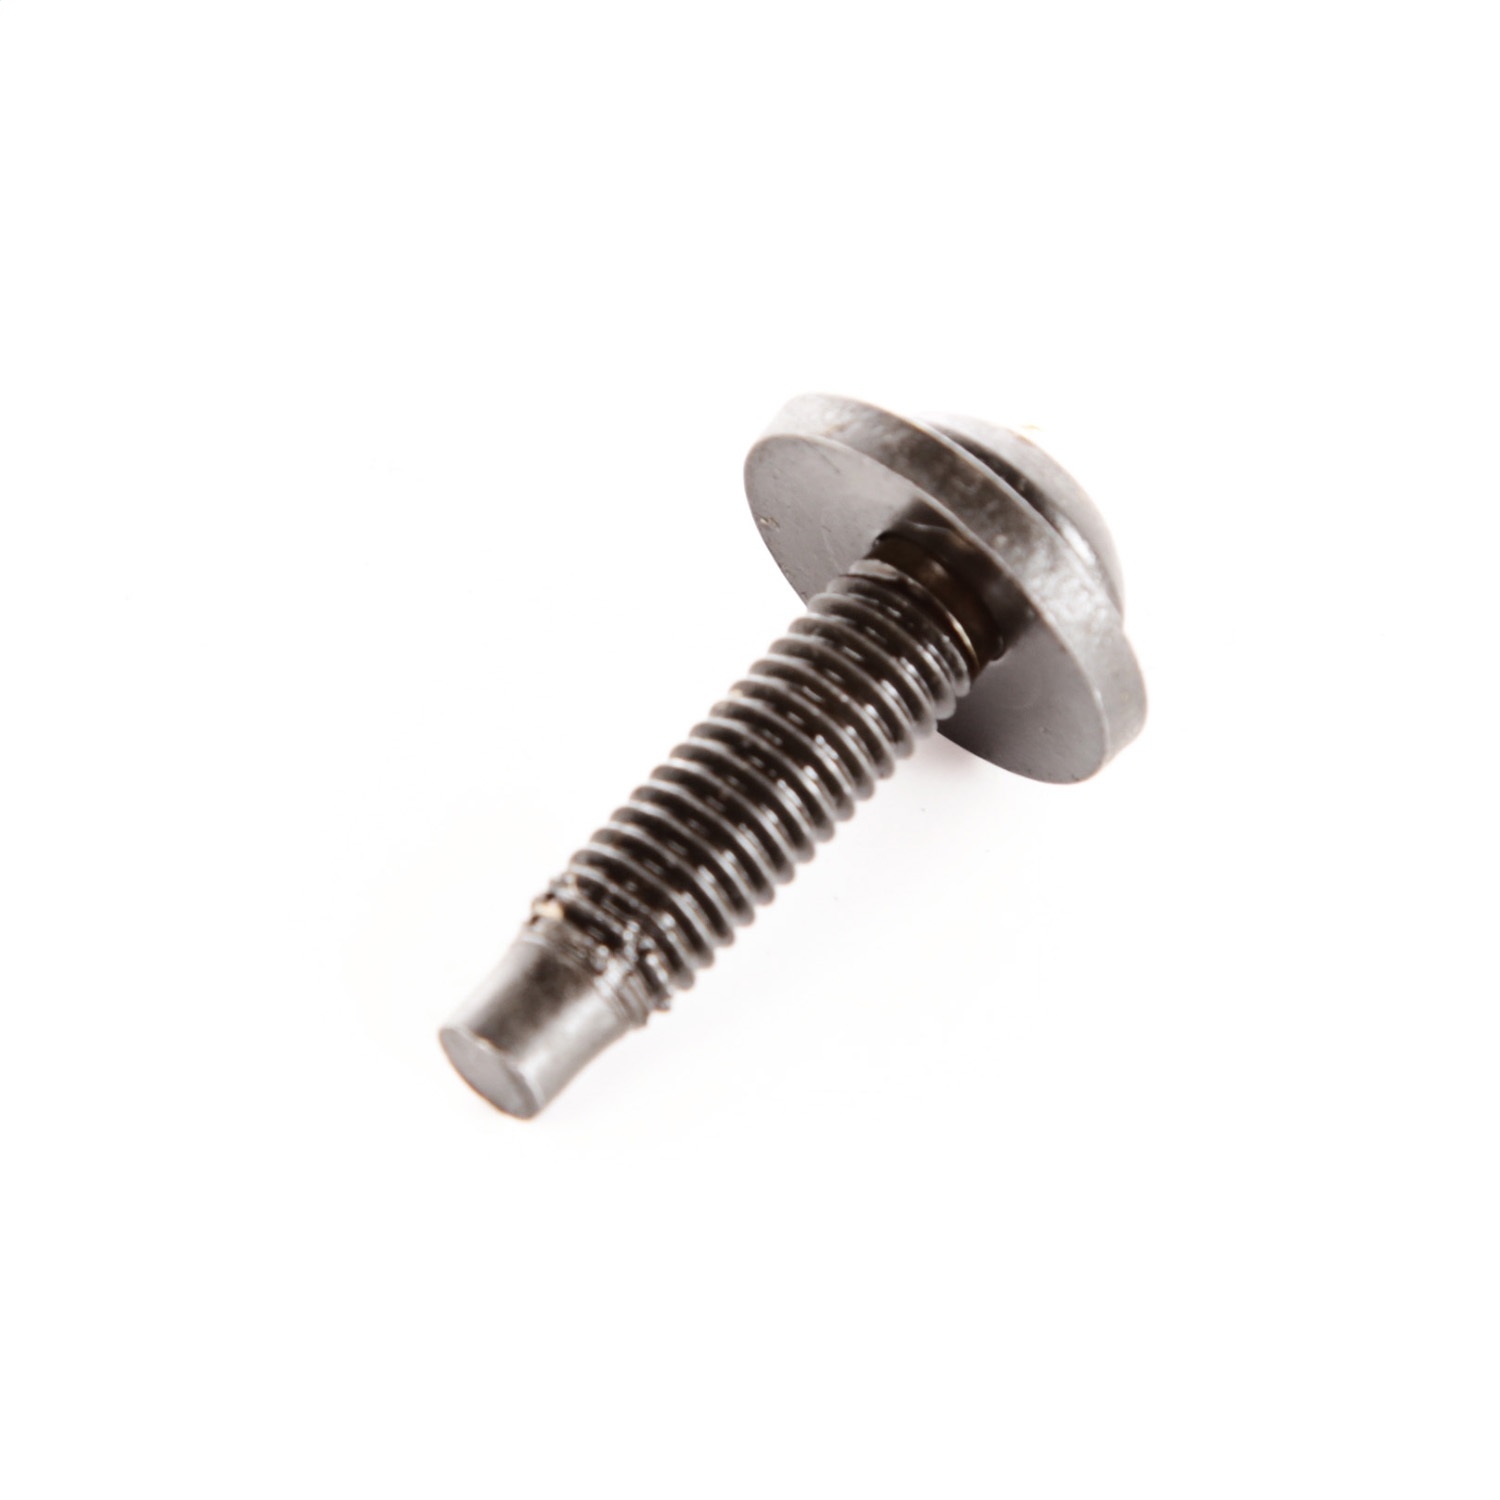 Omix This Fuel Door Screw From Omix Fits 84-91 Jeep Cherokee Xj And 86-92 Jeep Comanche Mj.,